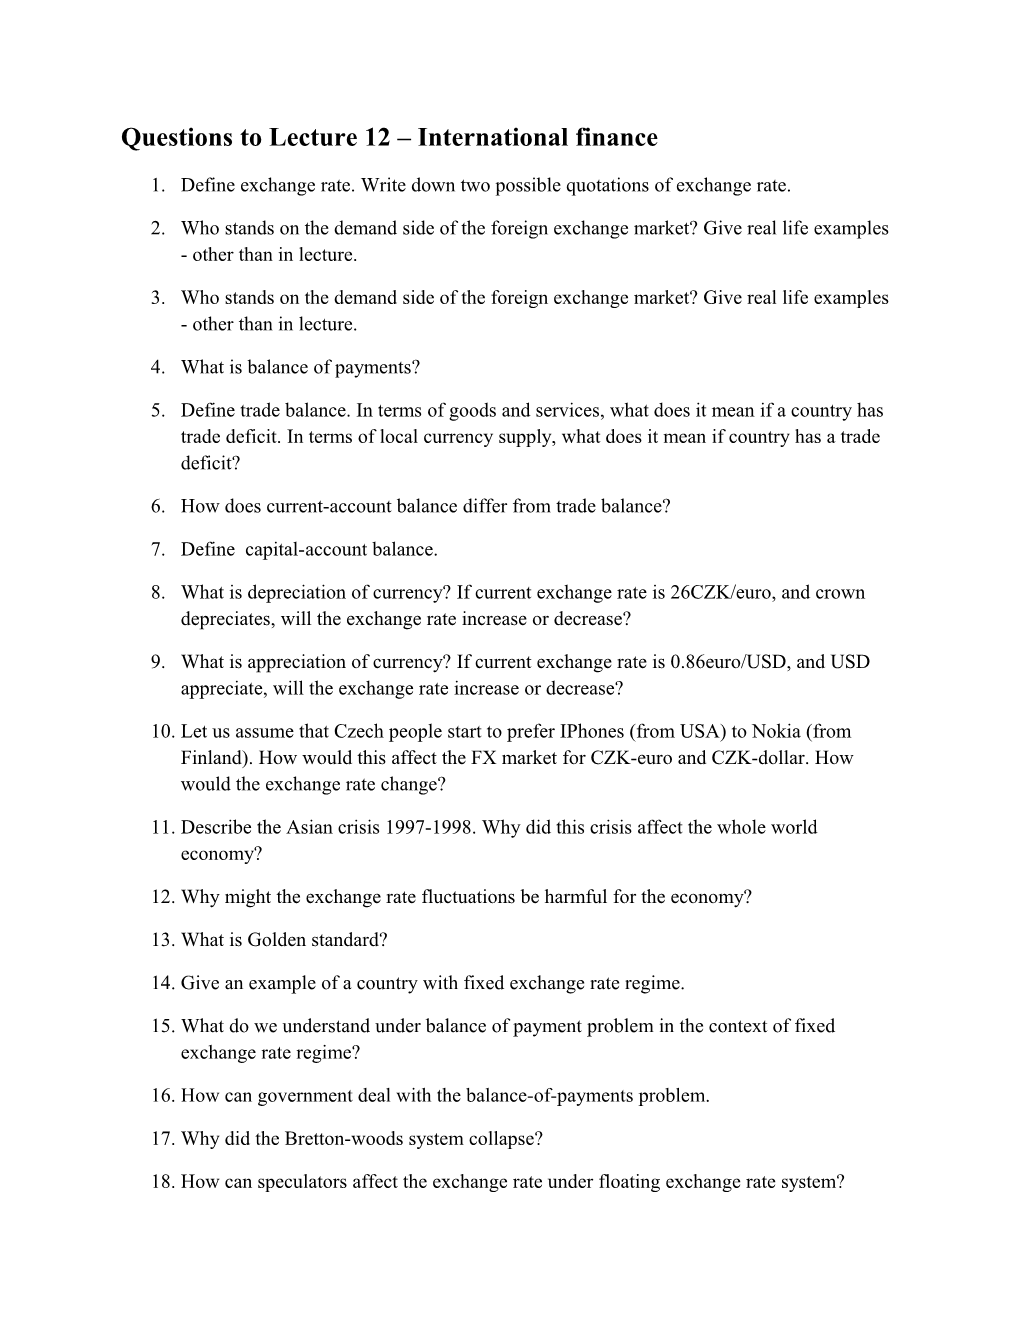 Questions to Lecture 12 International Finance